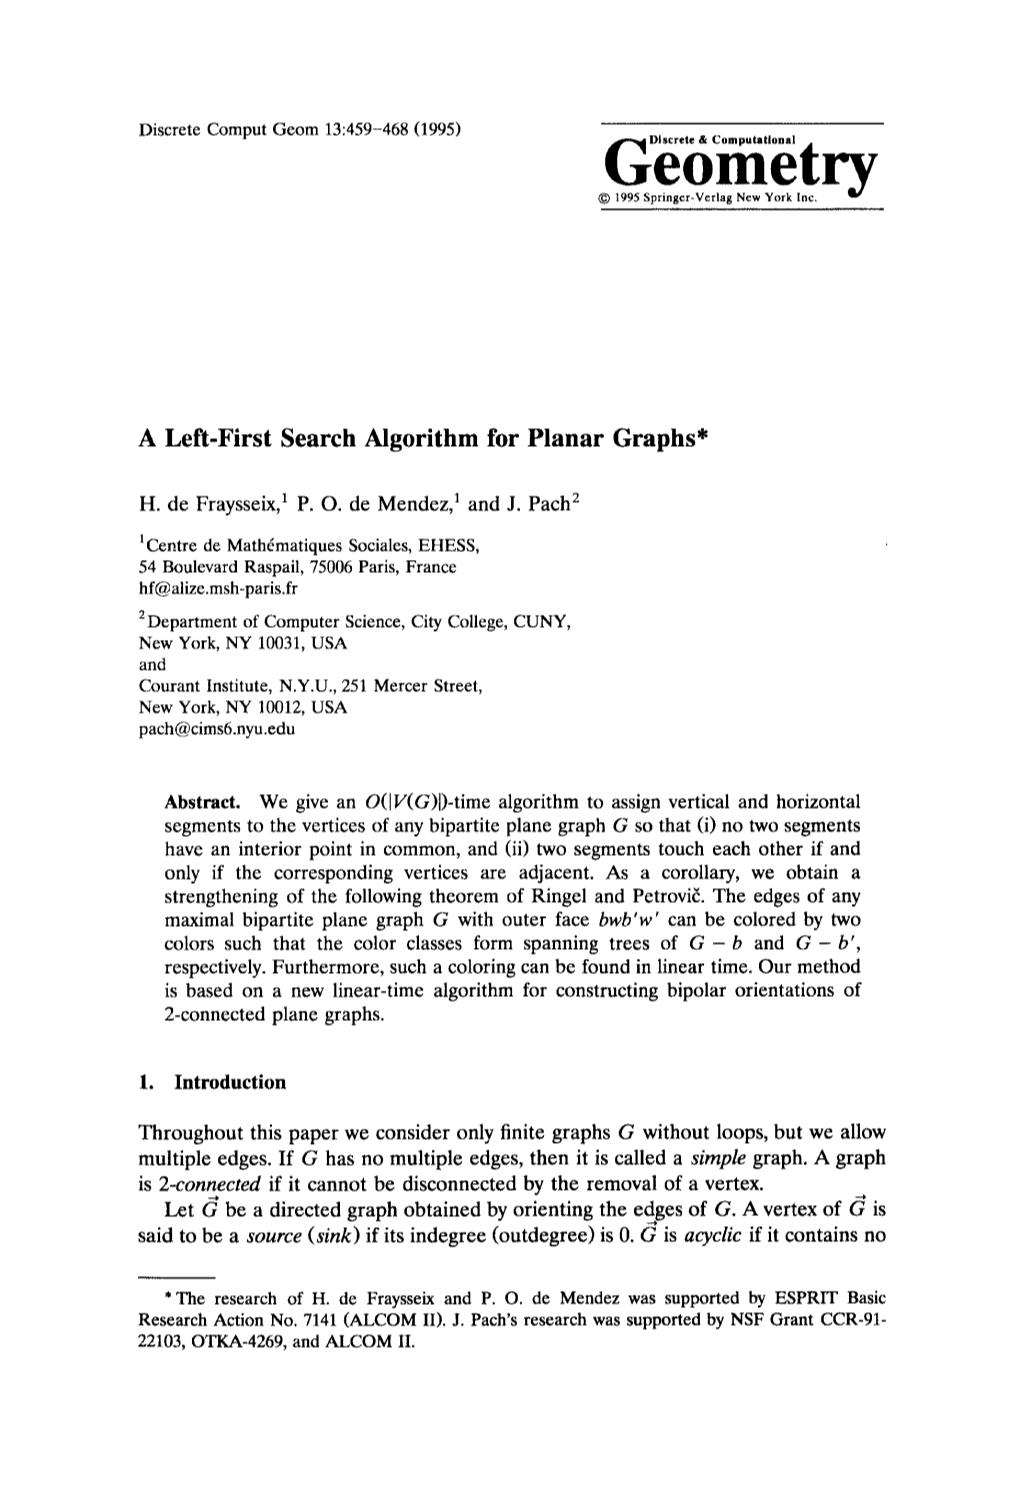 A Left-First Search Algorithm for Planar Graphs*